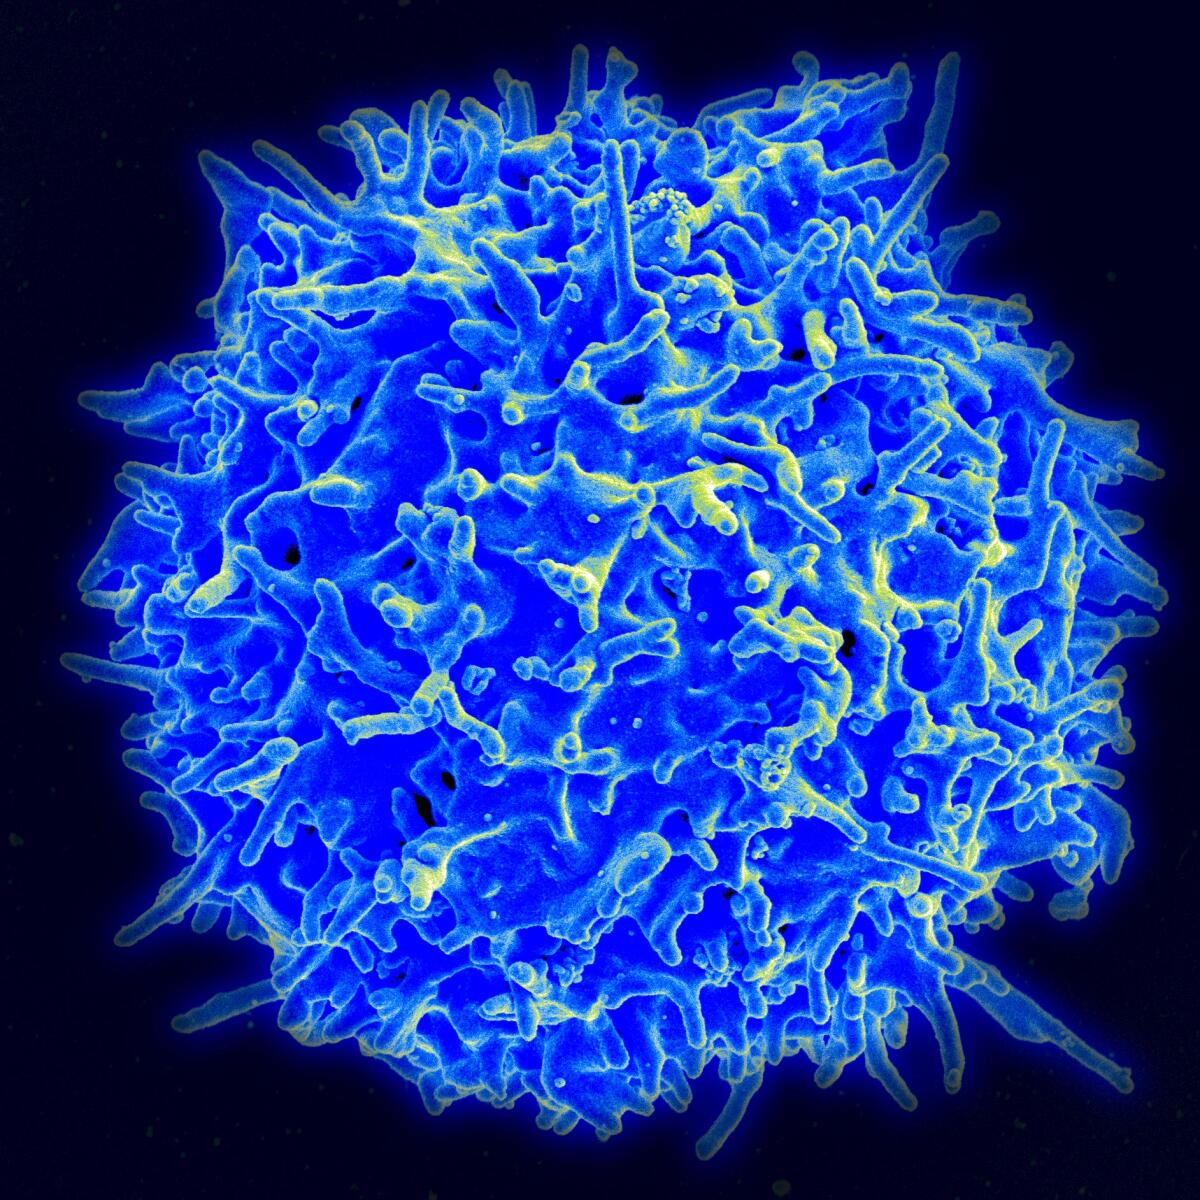 A scanning electron micrograph of a health human T cell.